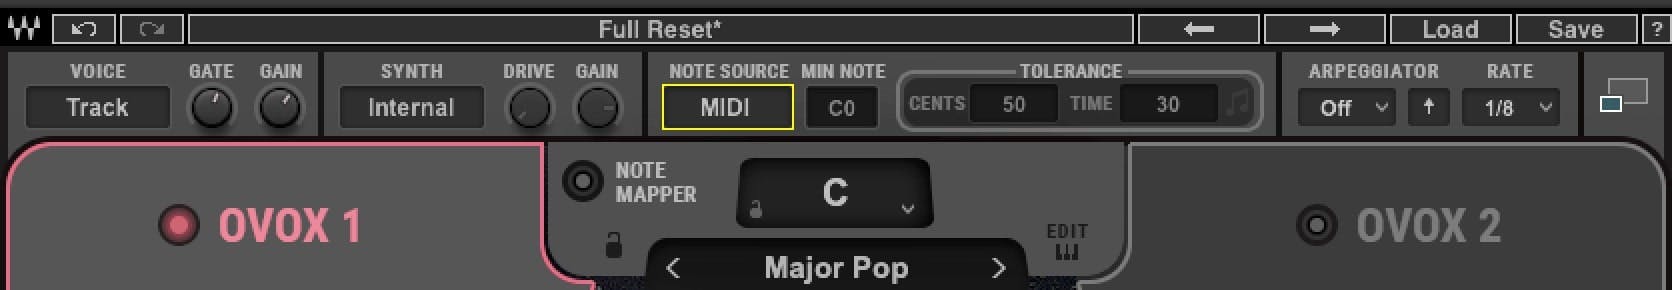 Inside OVox, make sure that ‘Note Source’ is set to either Auto or MIDI.